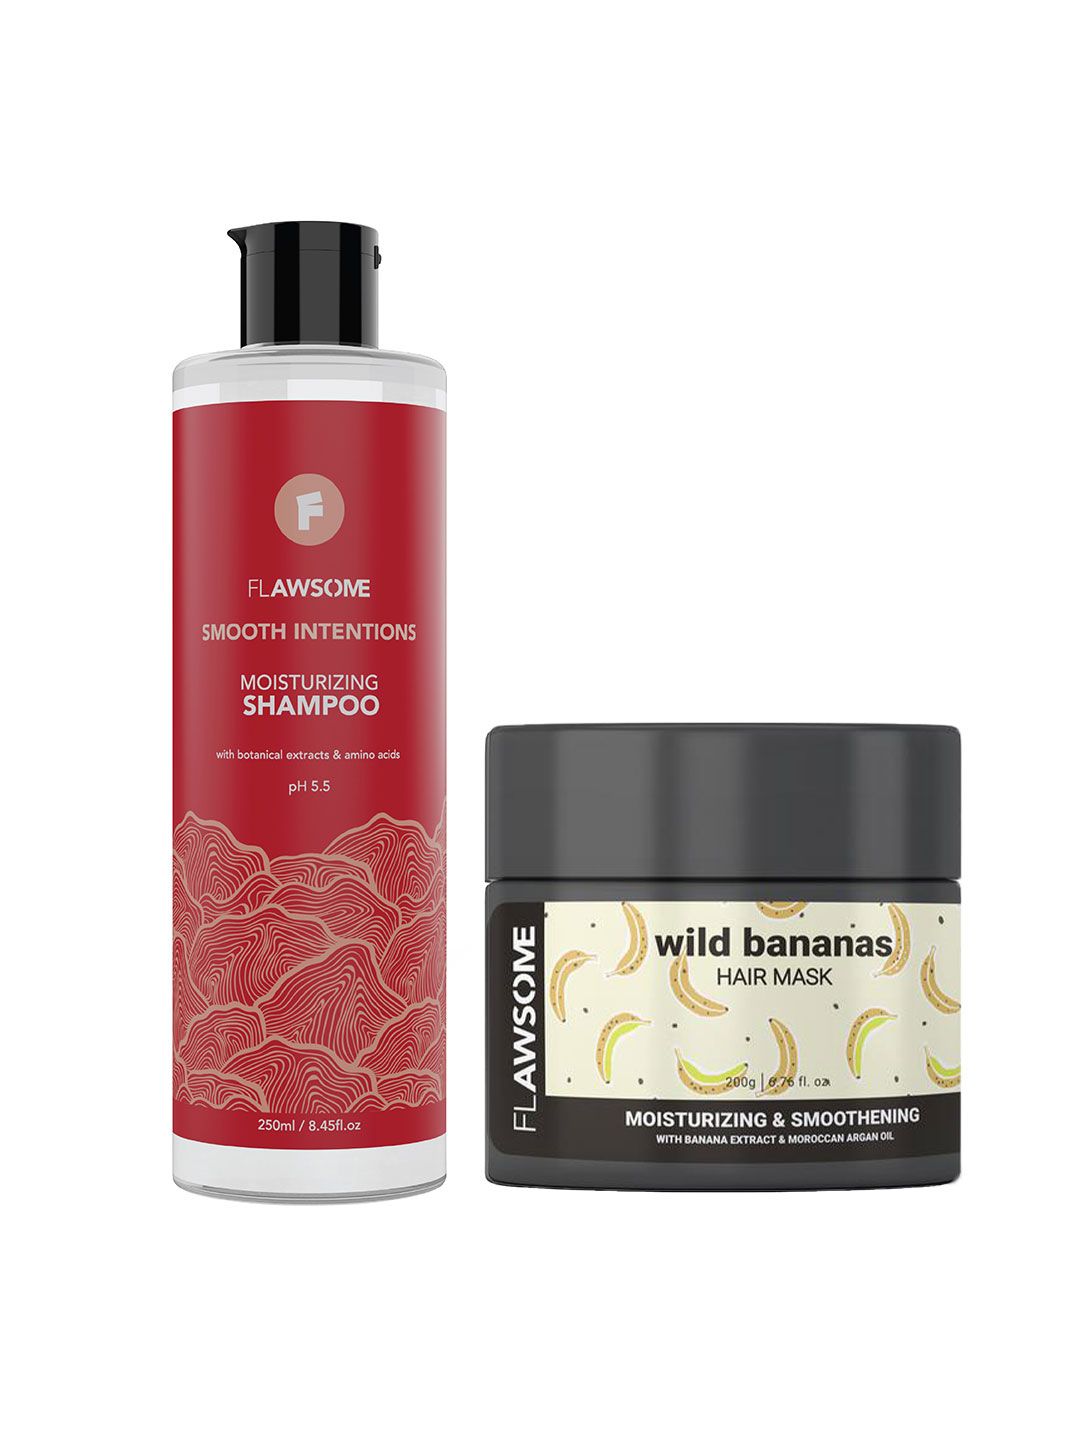 Flawsome Smooth Intentions Moisturizing Shampoo - Wild Banana Hair Mask Combo Price in India